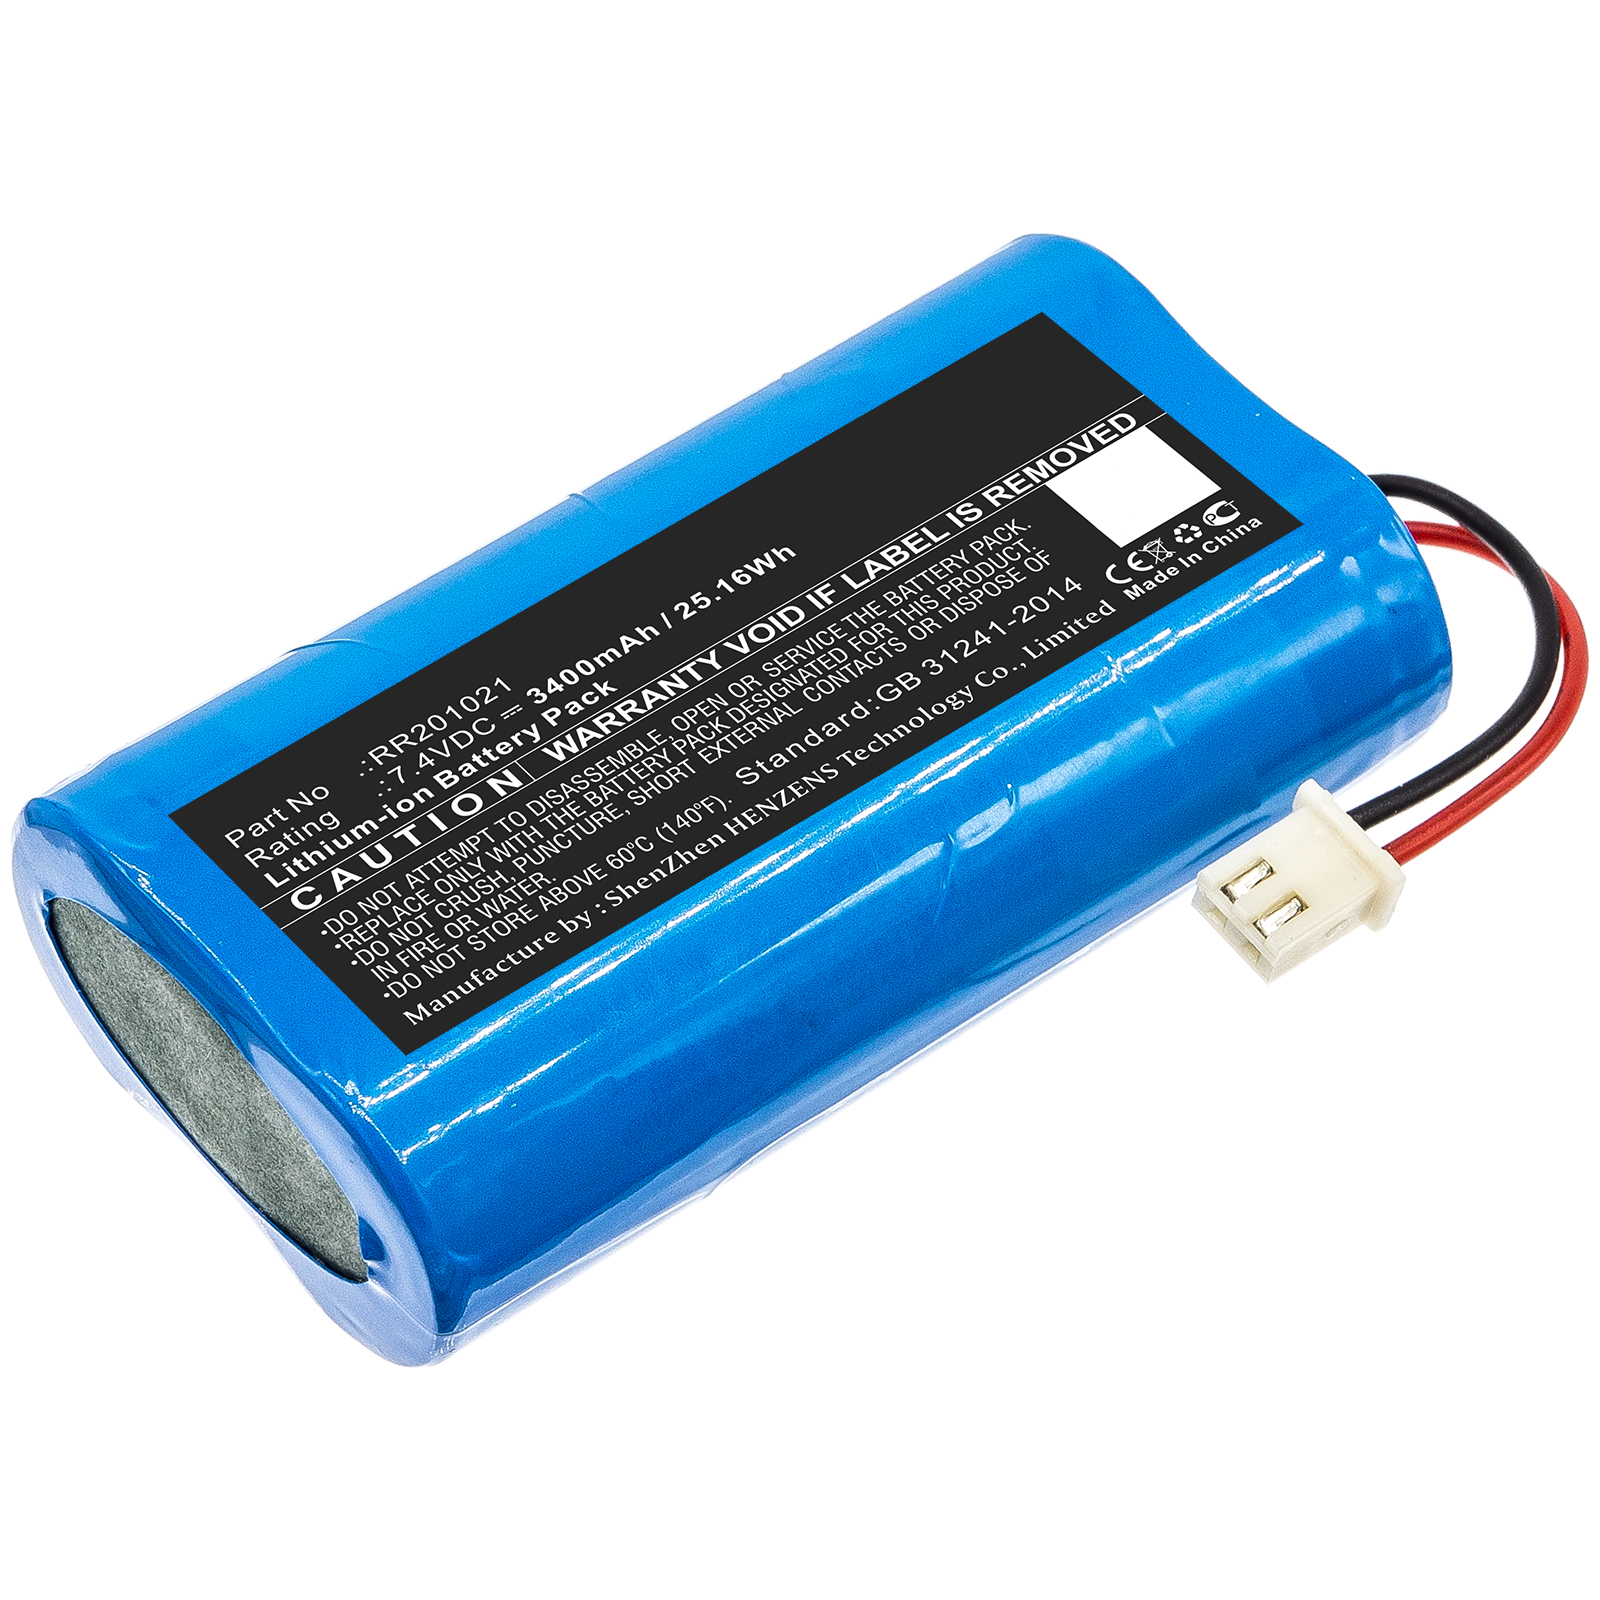 Synergy Digital Equipment Battery, Compatible with Fusion RR201021 Equipment Battery (7.4V, Li-ion, 3400mAh)